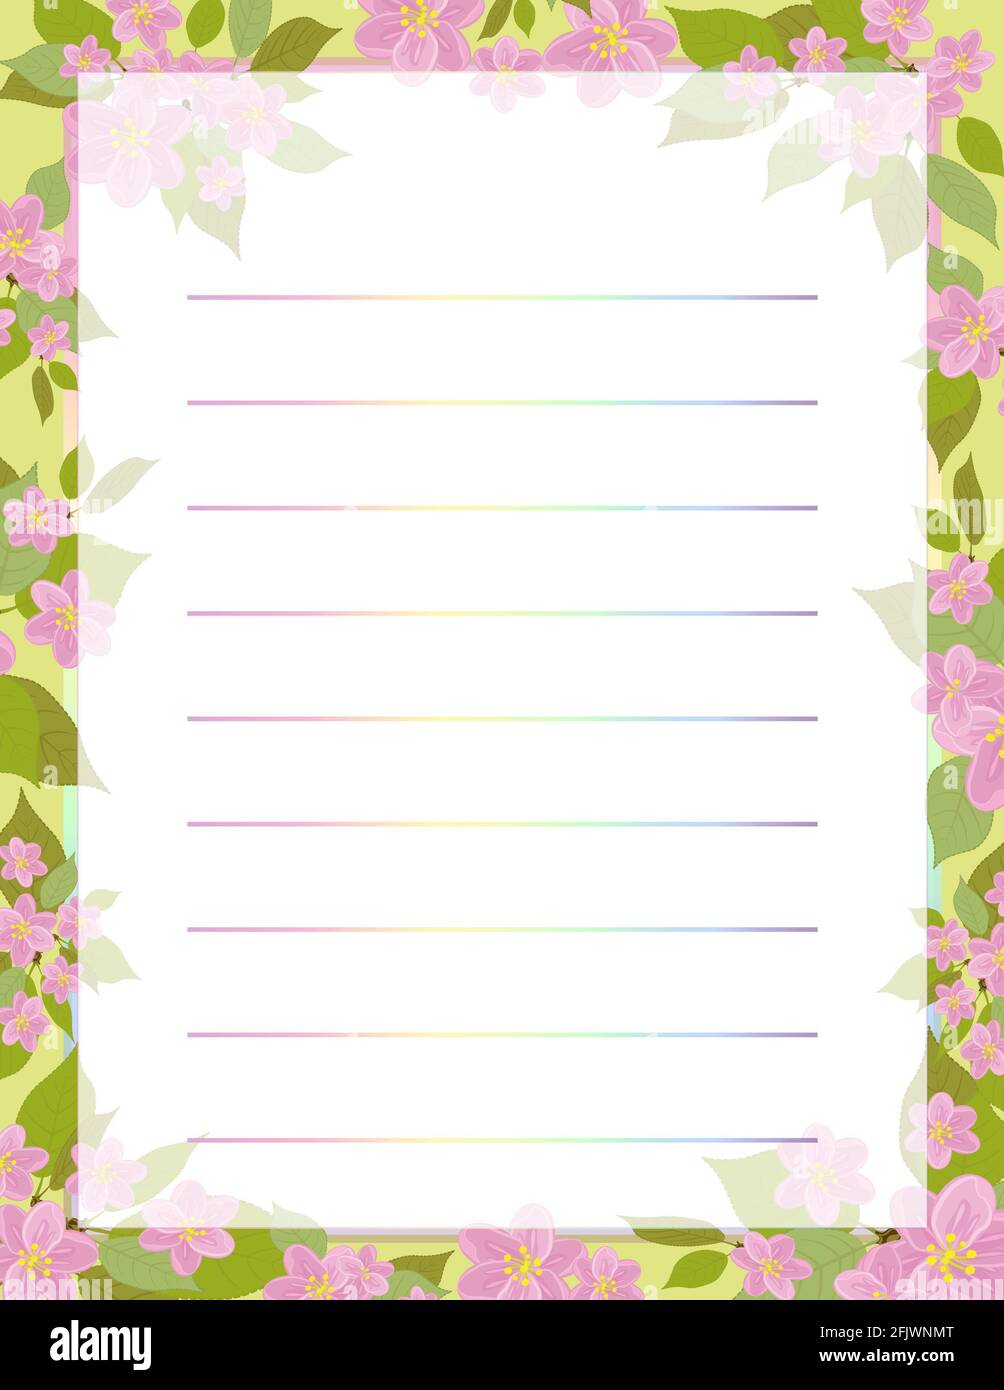 May Flowers Border Papers